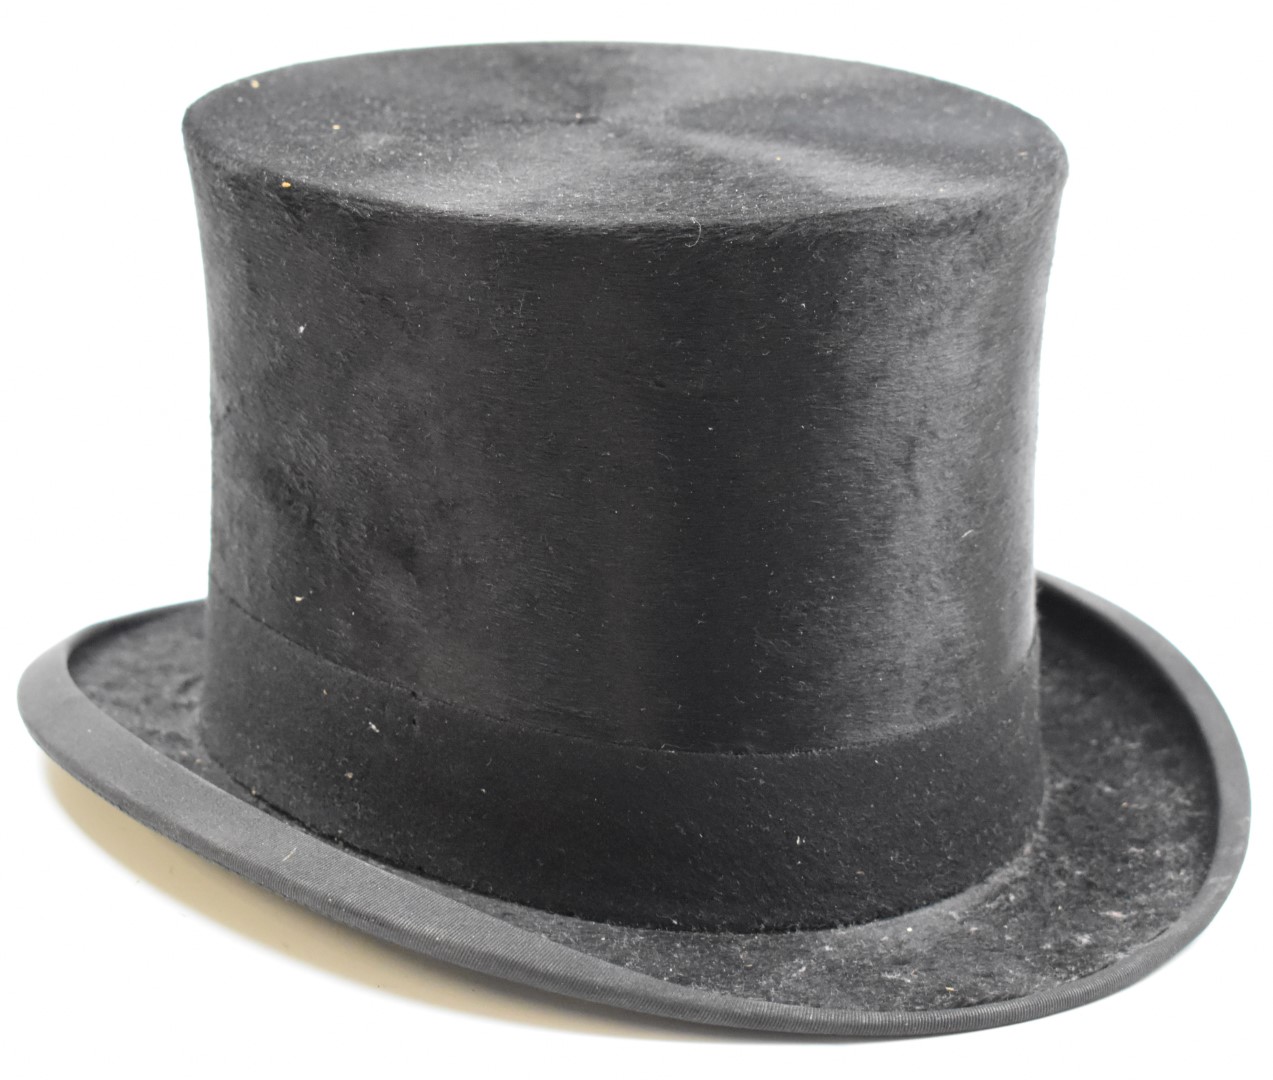 Silk top hat by Tress & Co, in hat box, together with a bowler hat - Image 3 of 12